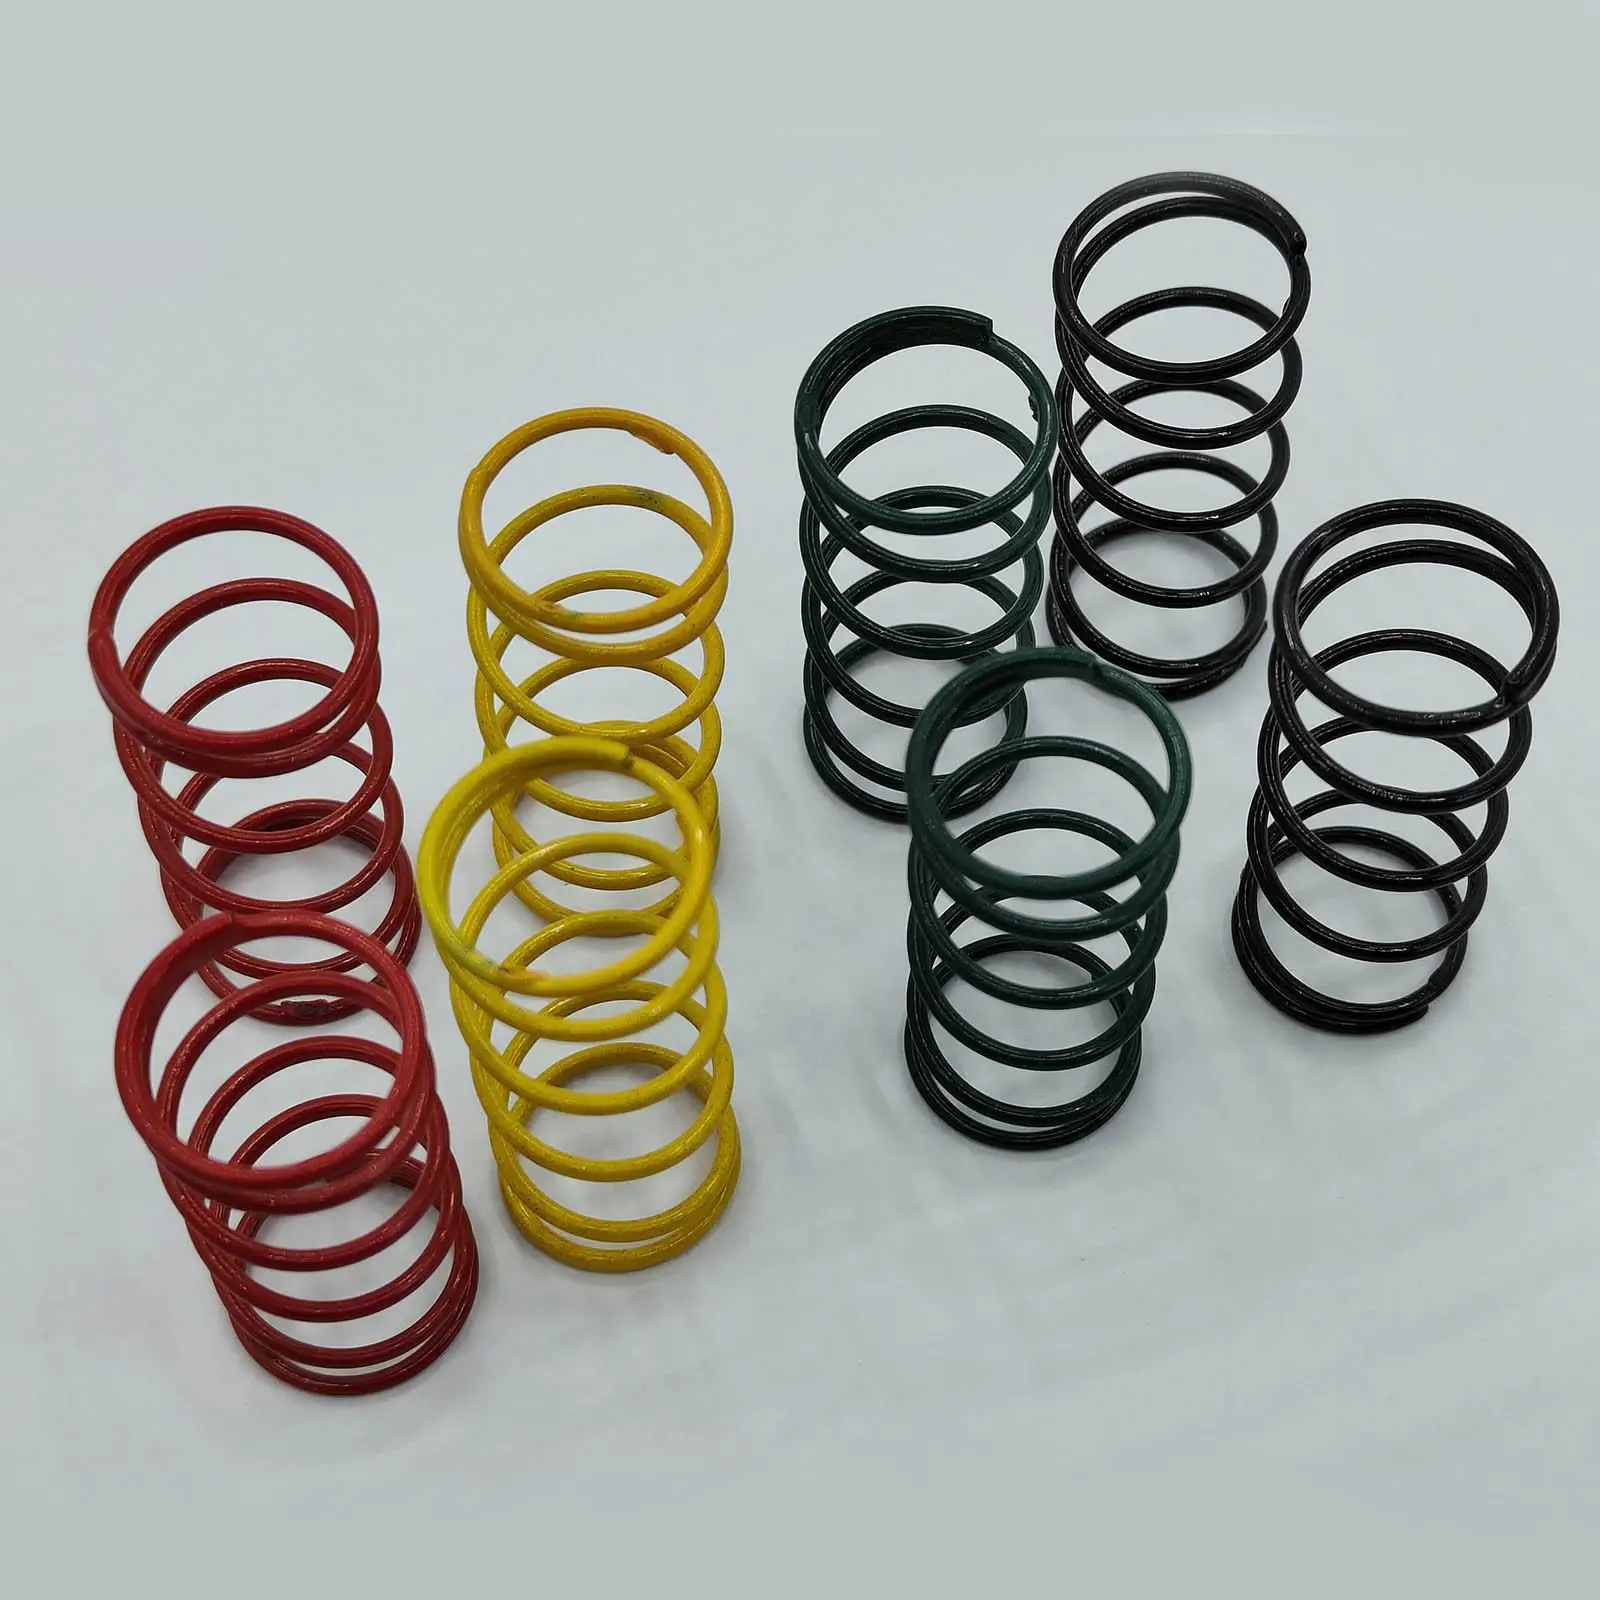 8x Big Bore Shock Spring Set Extension Spring for Traxxas for RC Car Truck